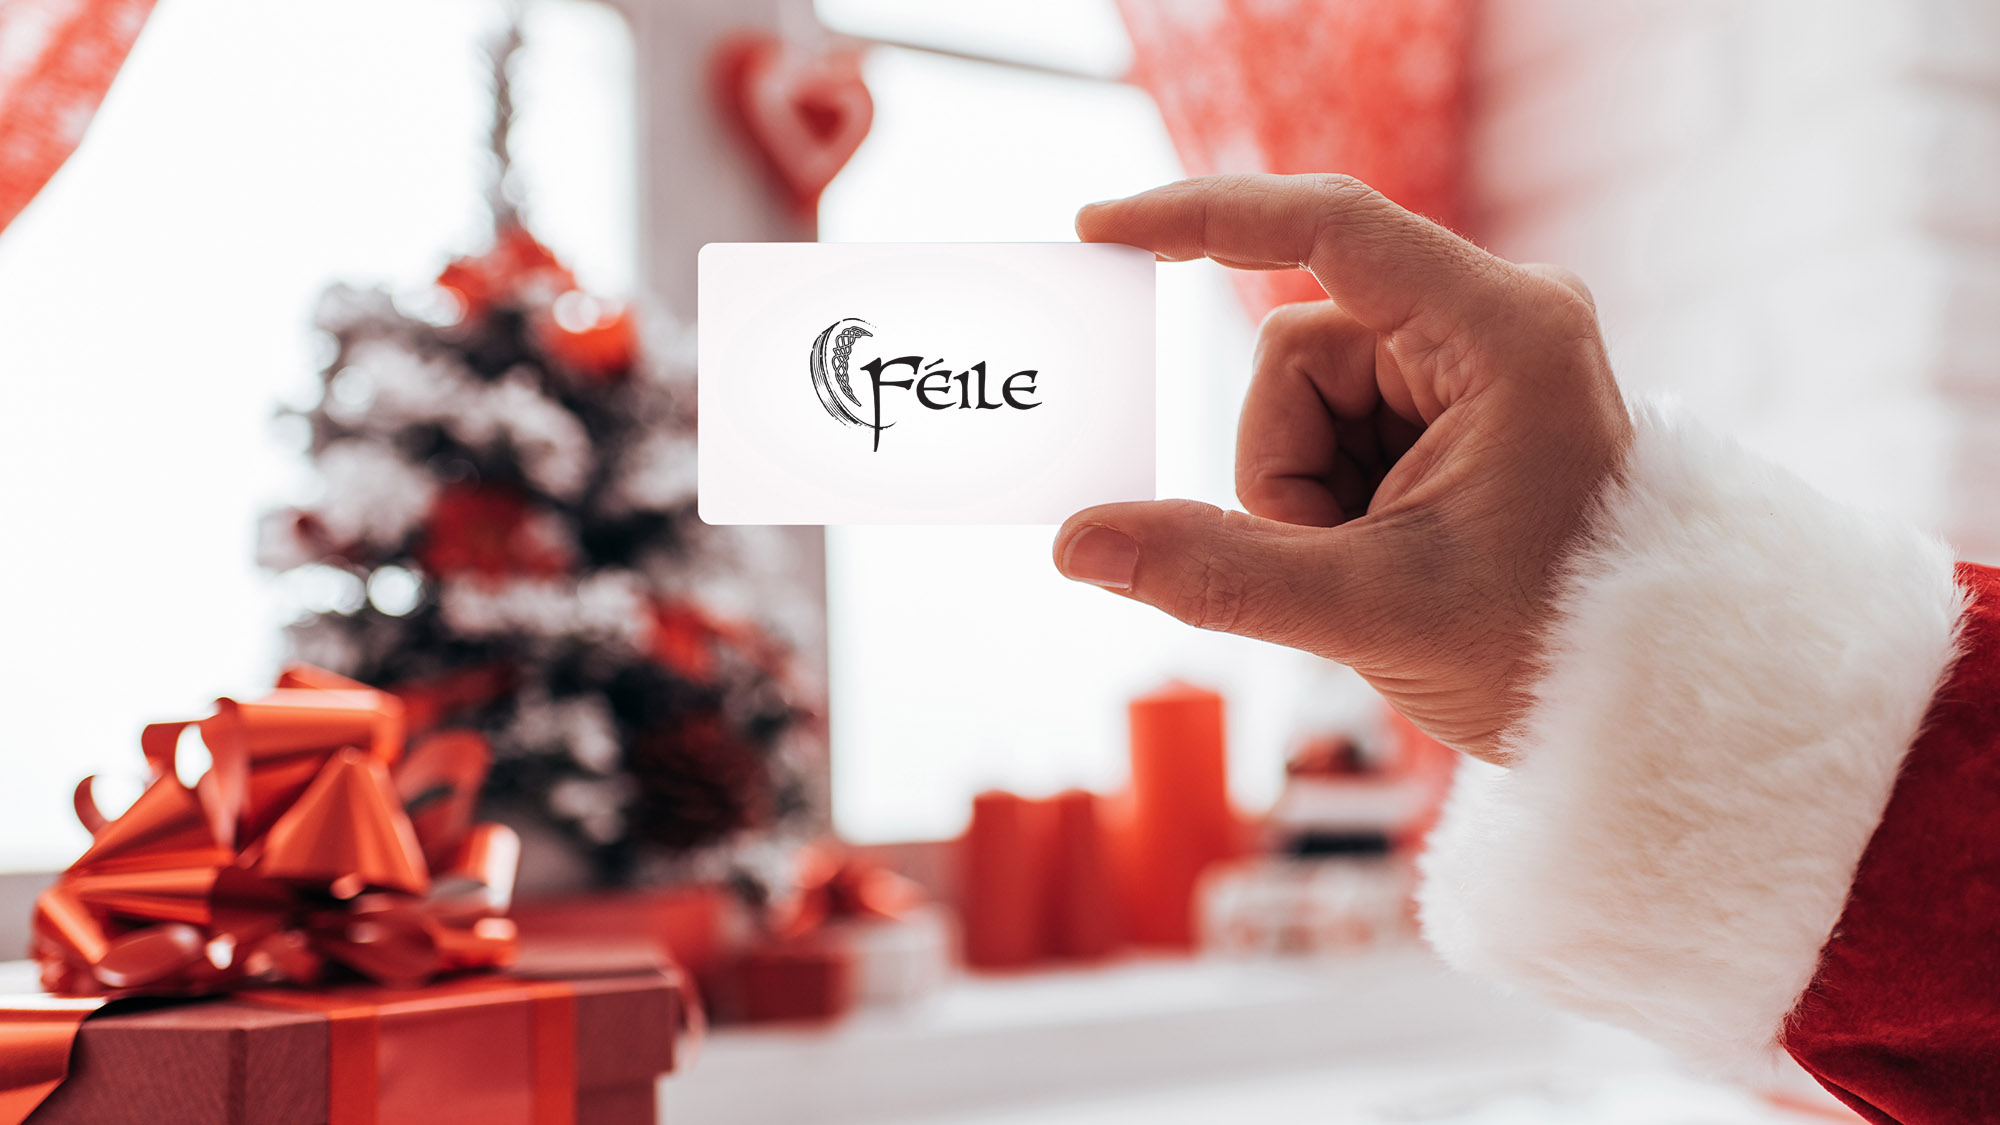 Santa holding Féile's gift card with a Christmas tree and presents in the background